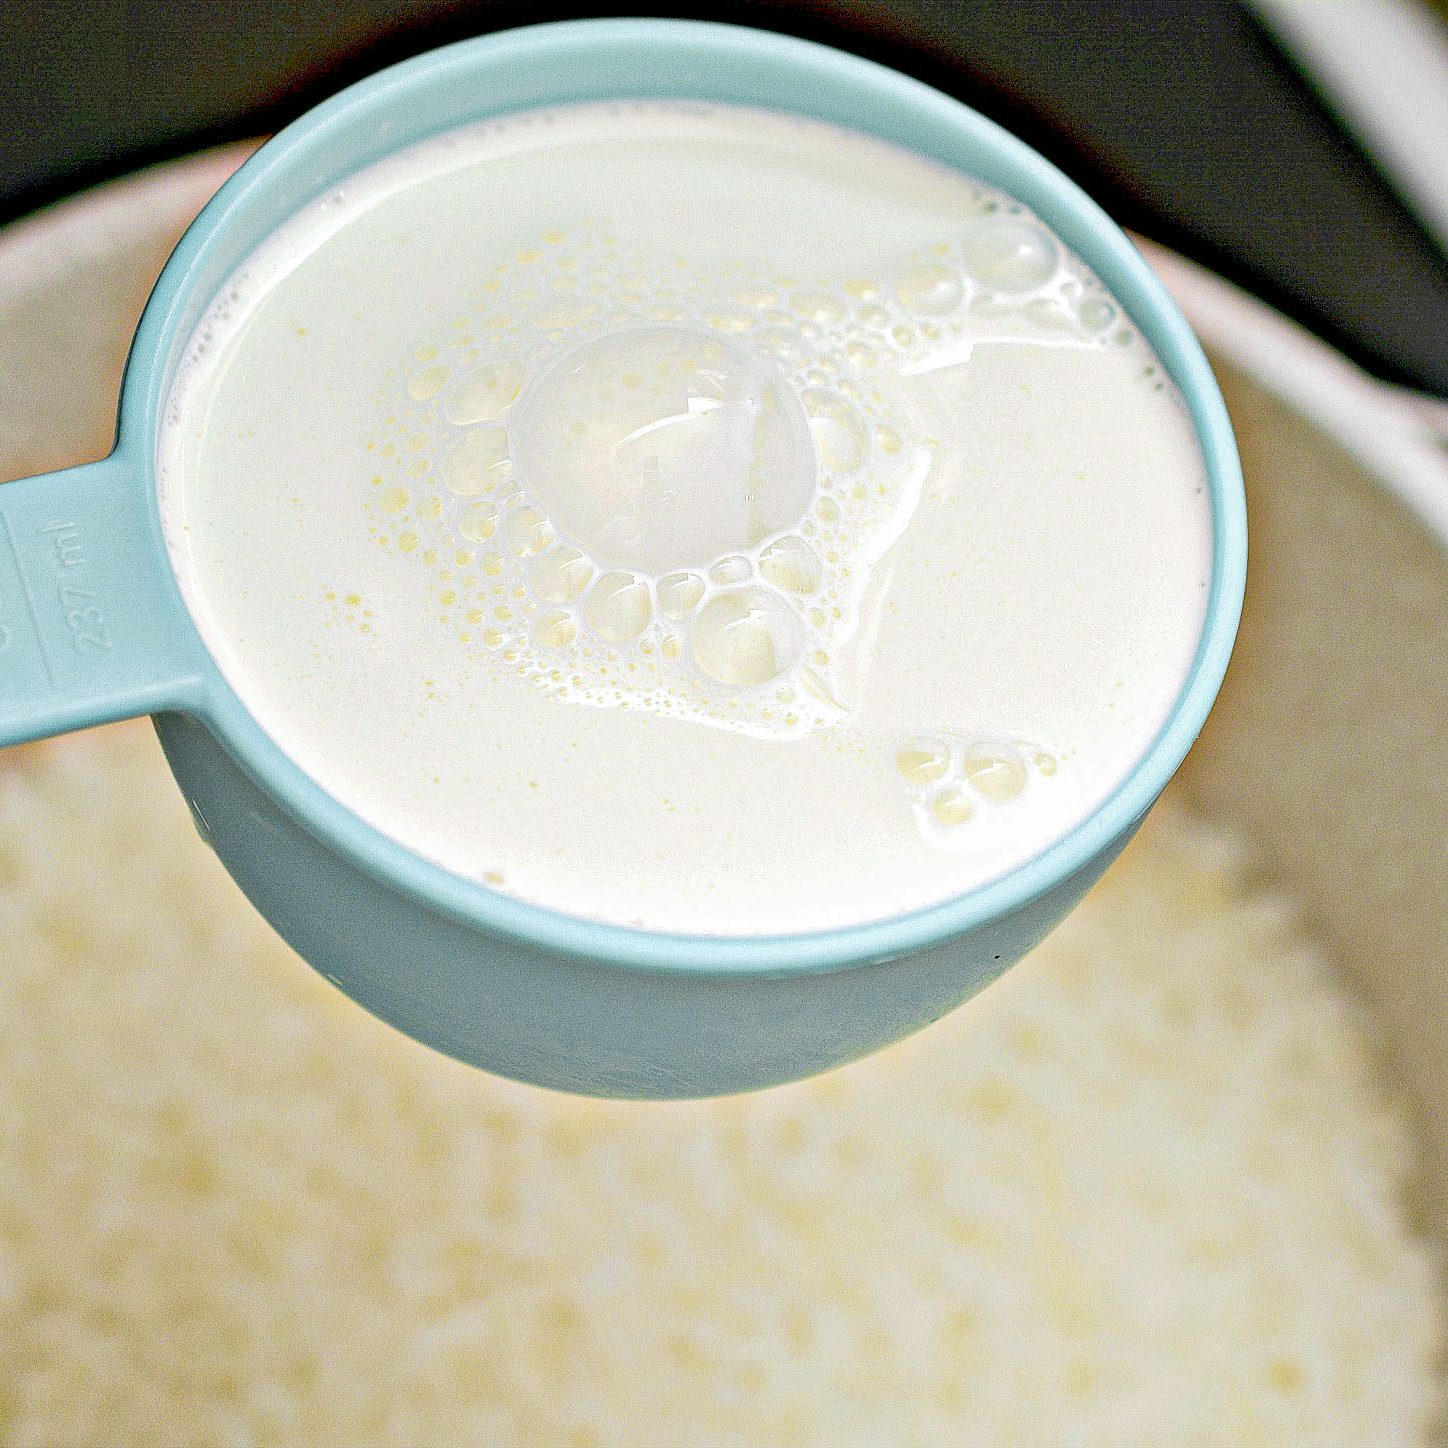 Add the butter to the cooked rice, and mix in the half and half, ½ cup of the milk, sugar, and salt.